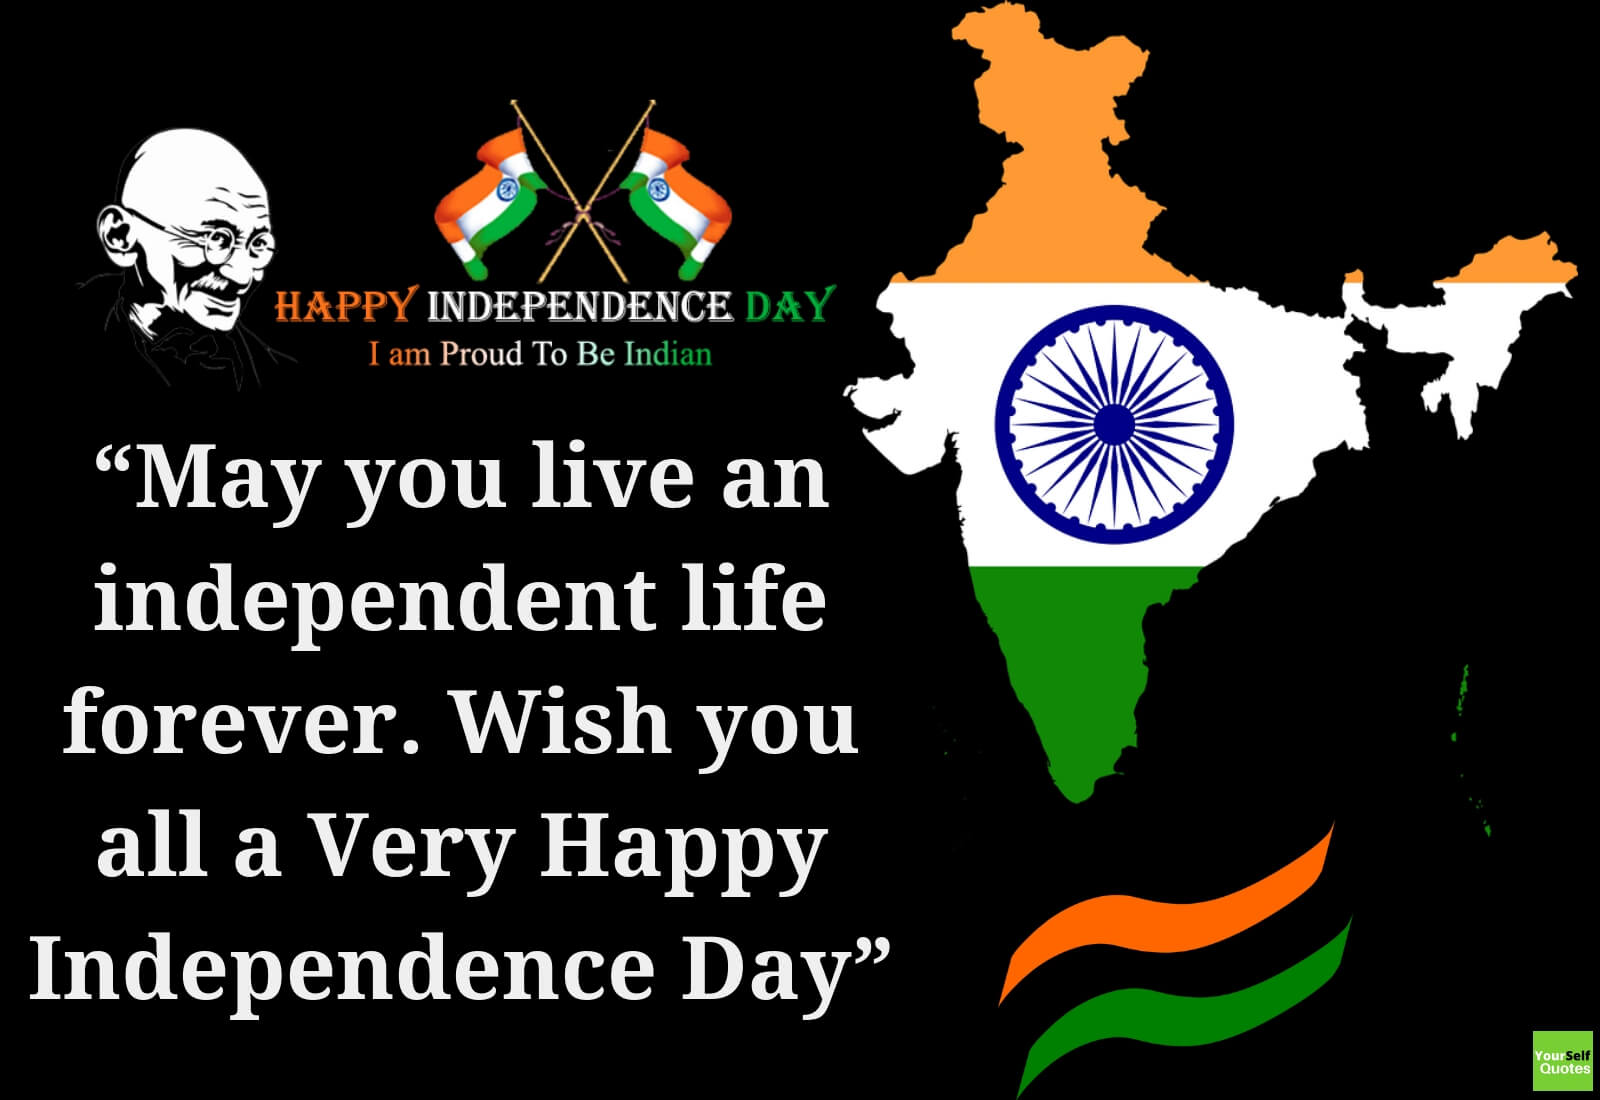 Wish you all a very happy Independence Day